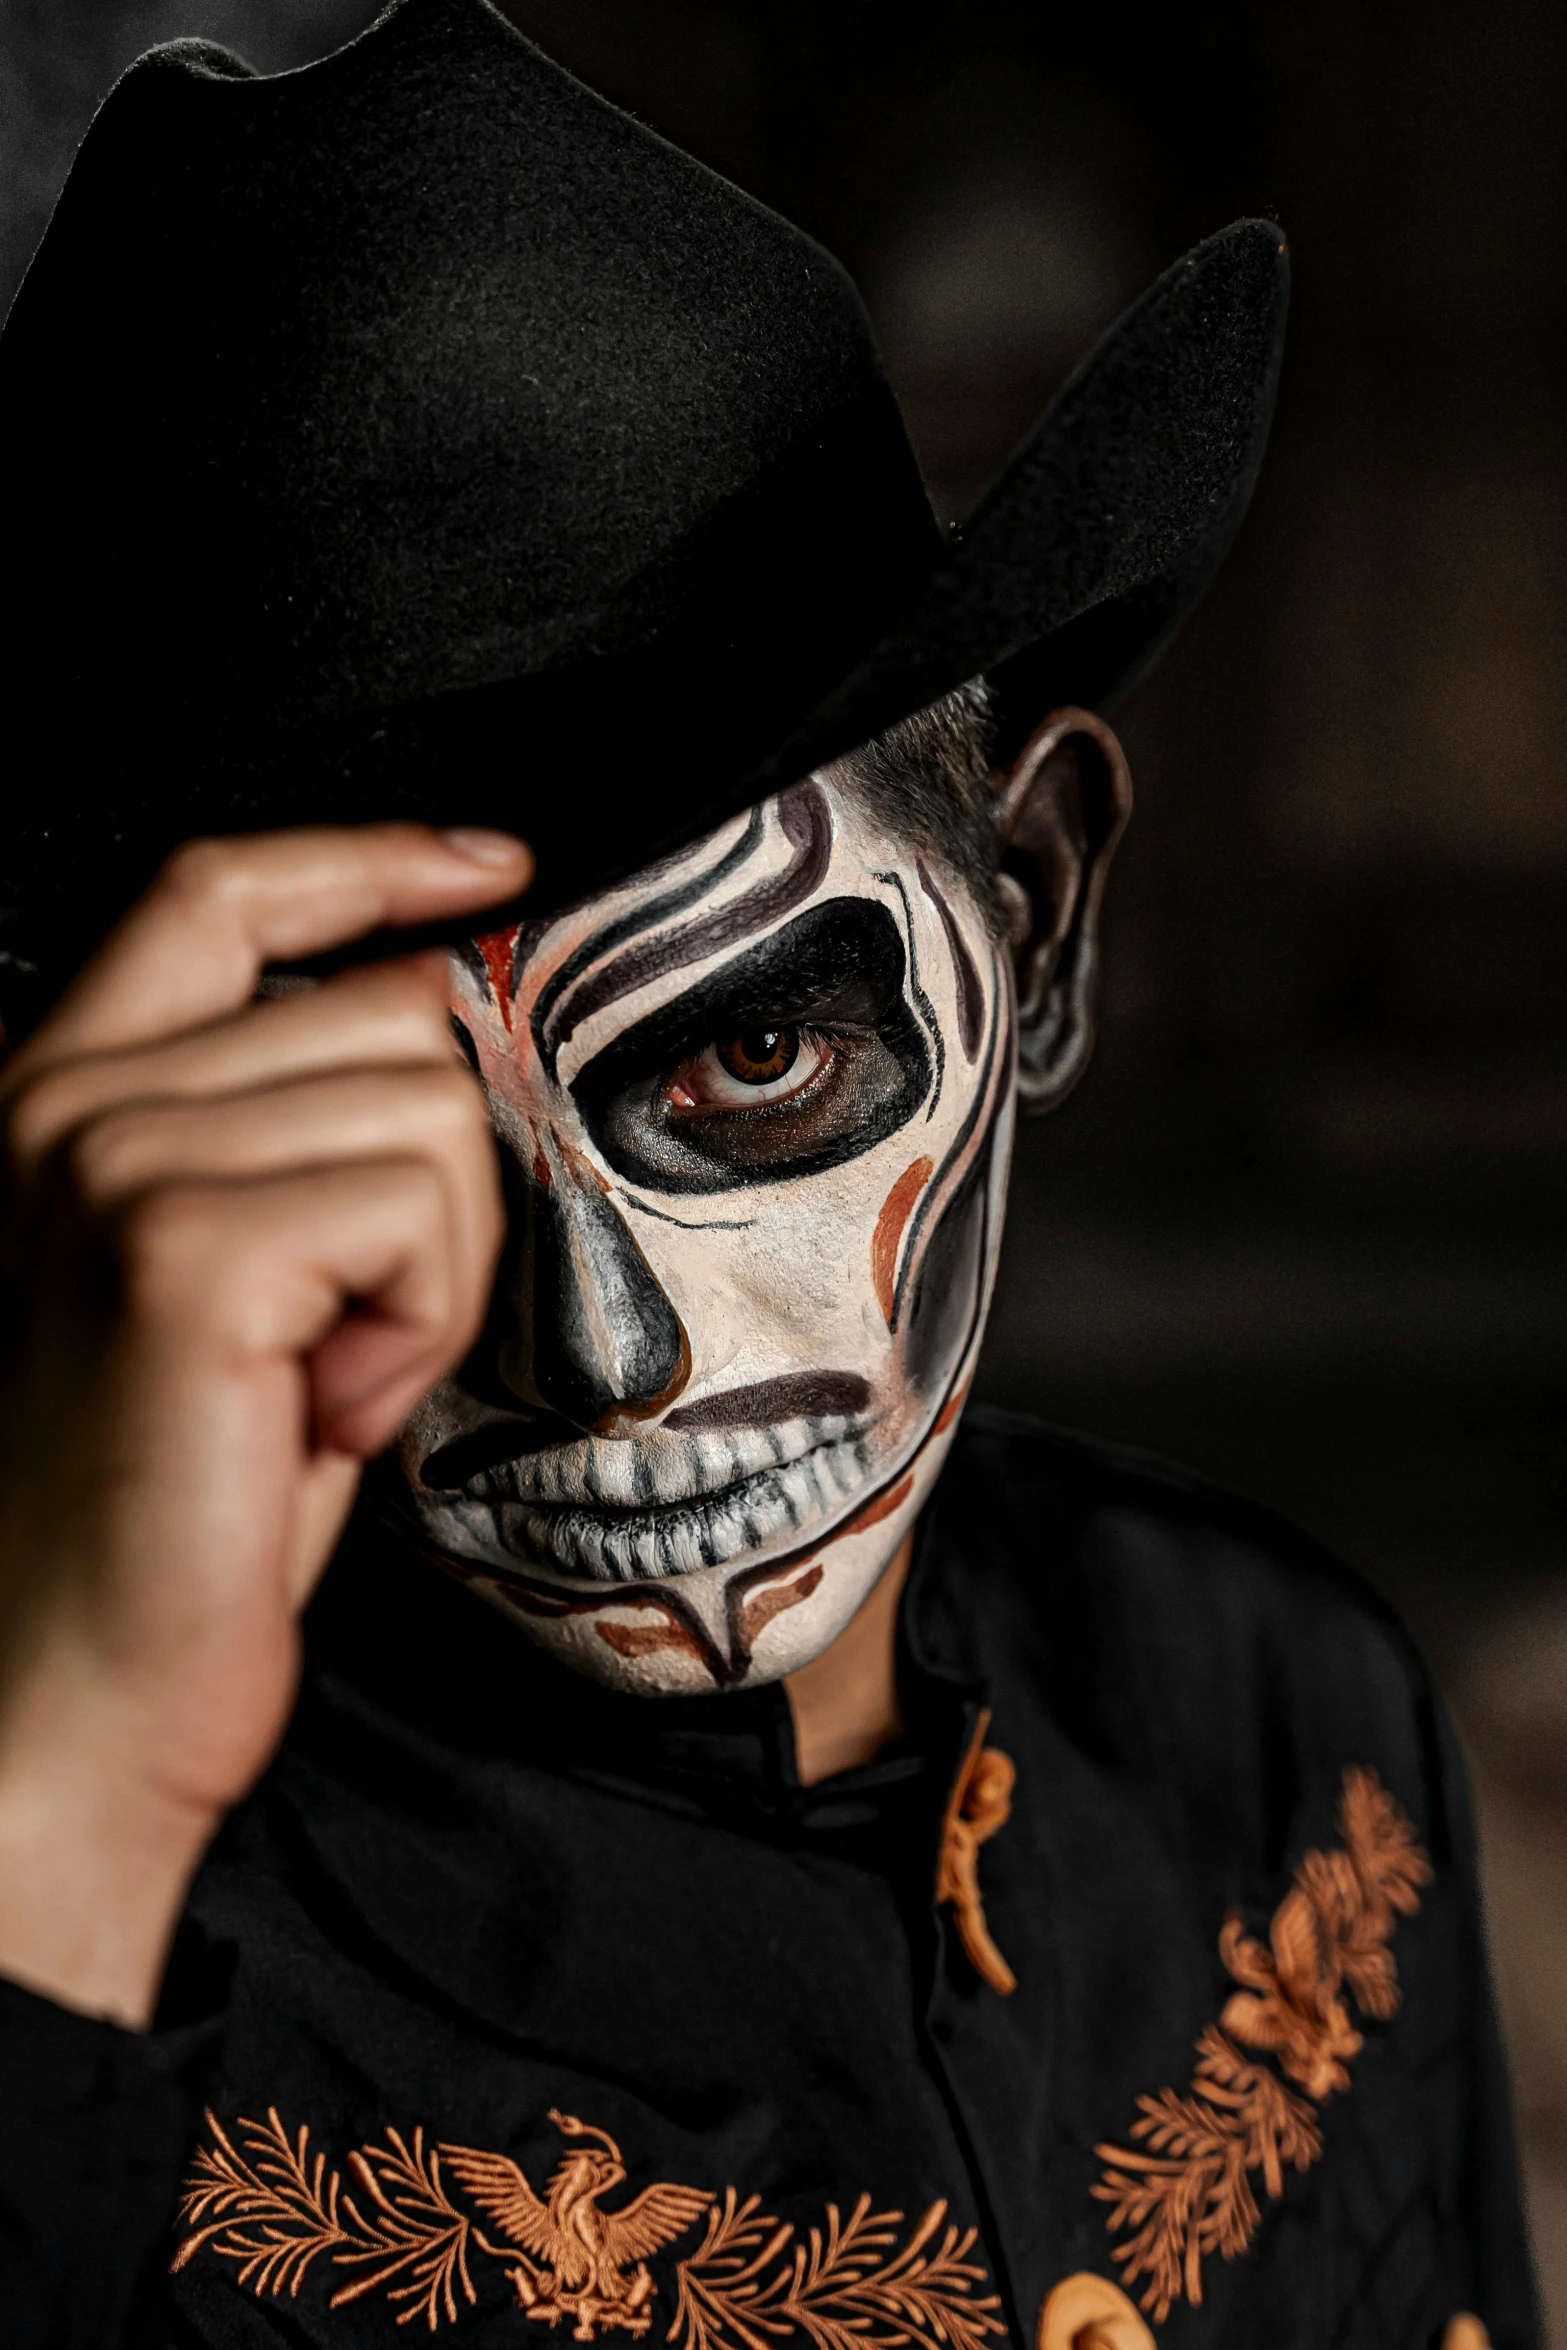 a man wearing a black top and white face painting